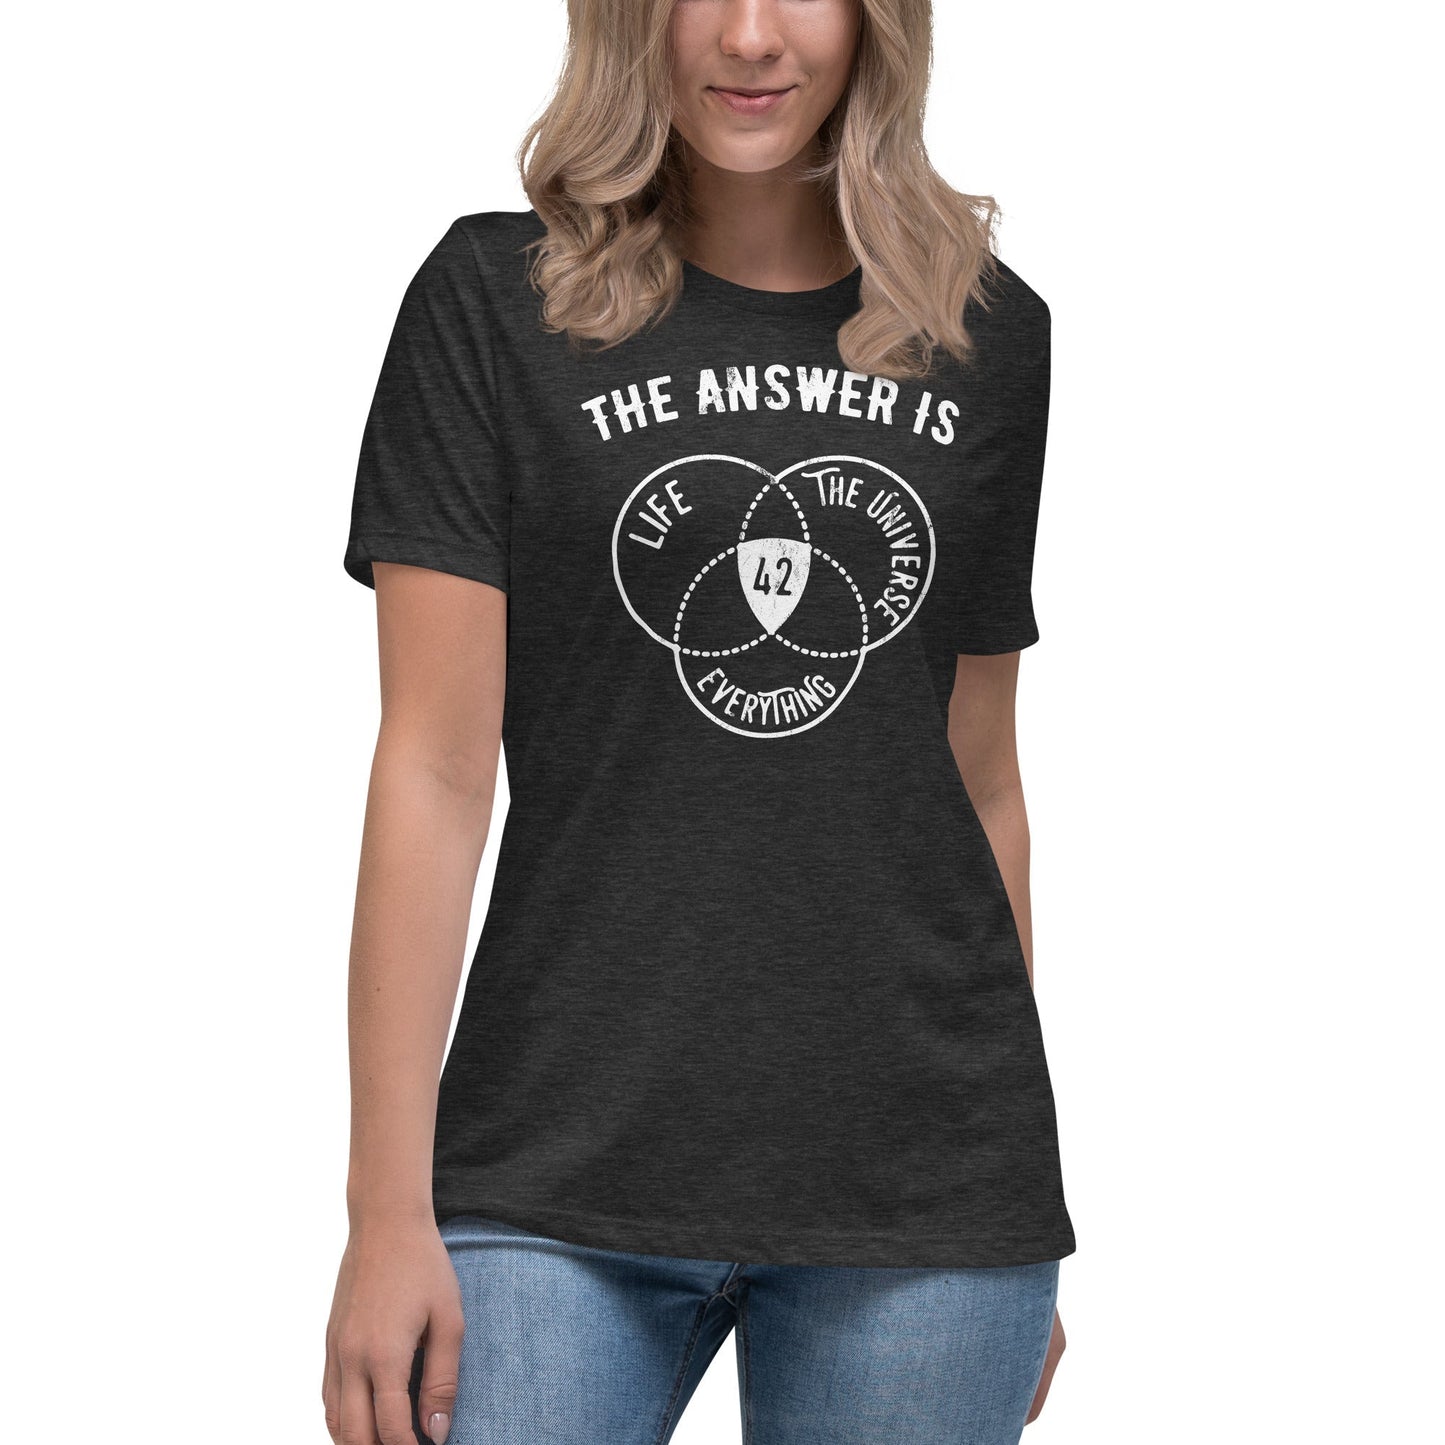 The Answer Is Always 42 - Women's T-Shirt